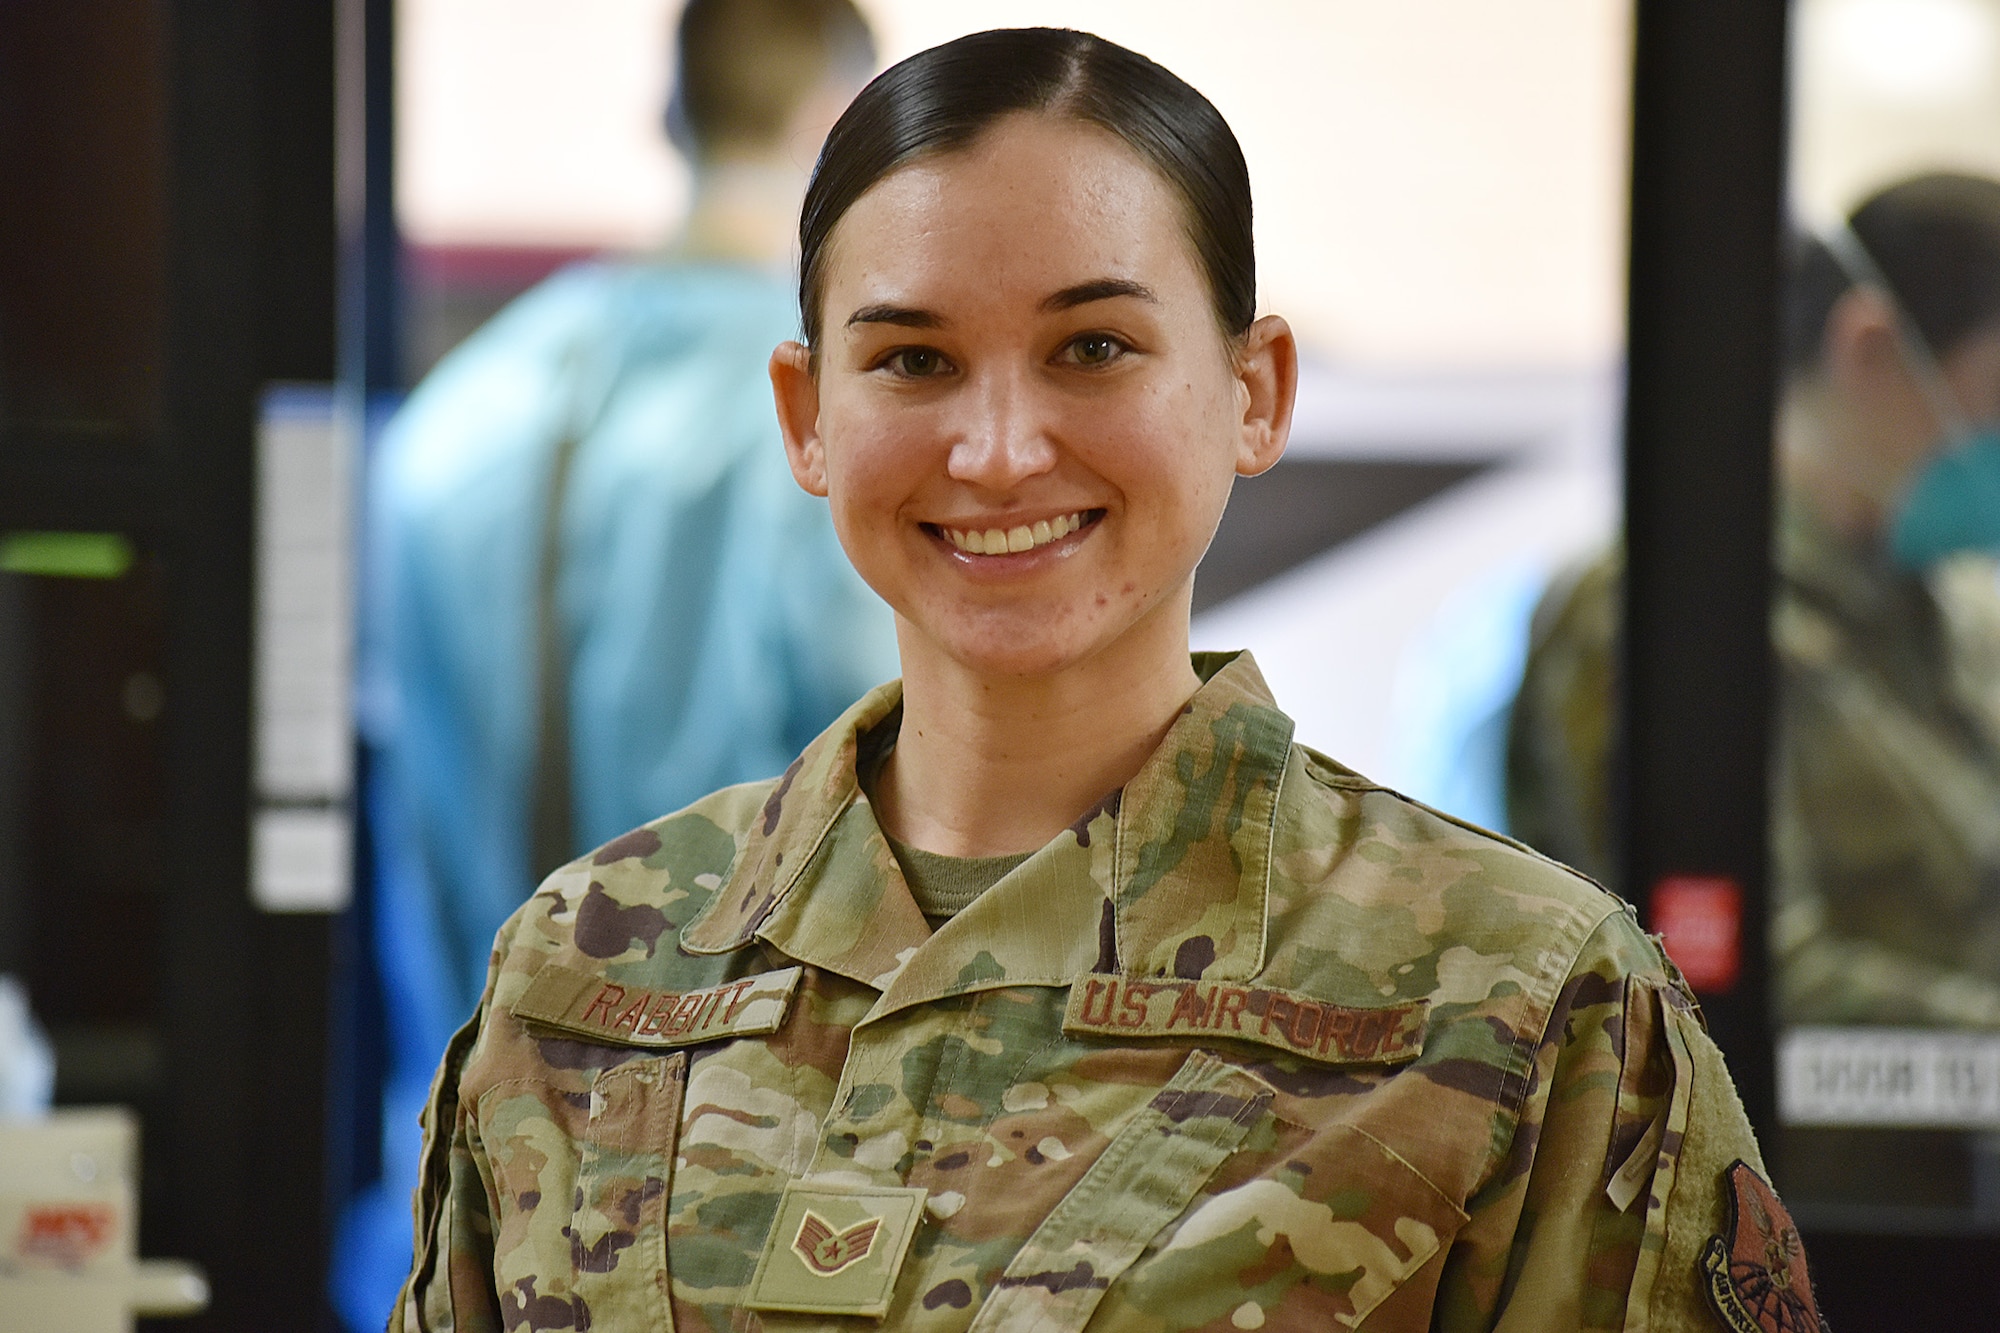 Sgt. Whitney Rabbitt, 341st Operational Medical Readiness Squadron NCO in charge of community health, poses for a photo Dec. 3, 2020, at Malmstrom Air Force Base, Mont. Rabbitt and her team are responsible for testing military personnel for COVID-19 and conducting interviews for contact tracing. (U.S. Air Force photo by Senior Airman Daniel Brosam)